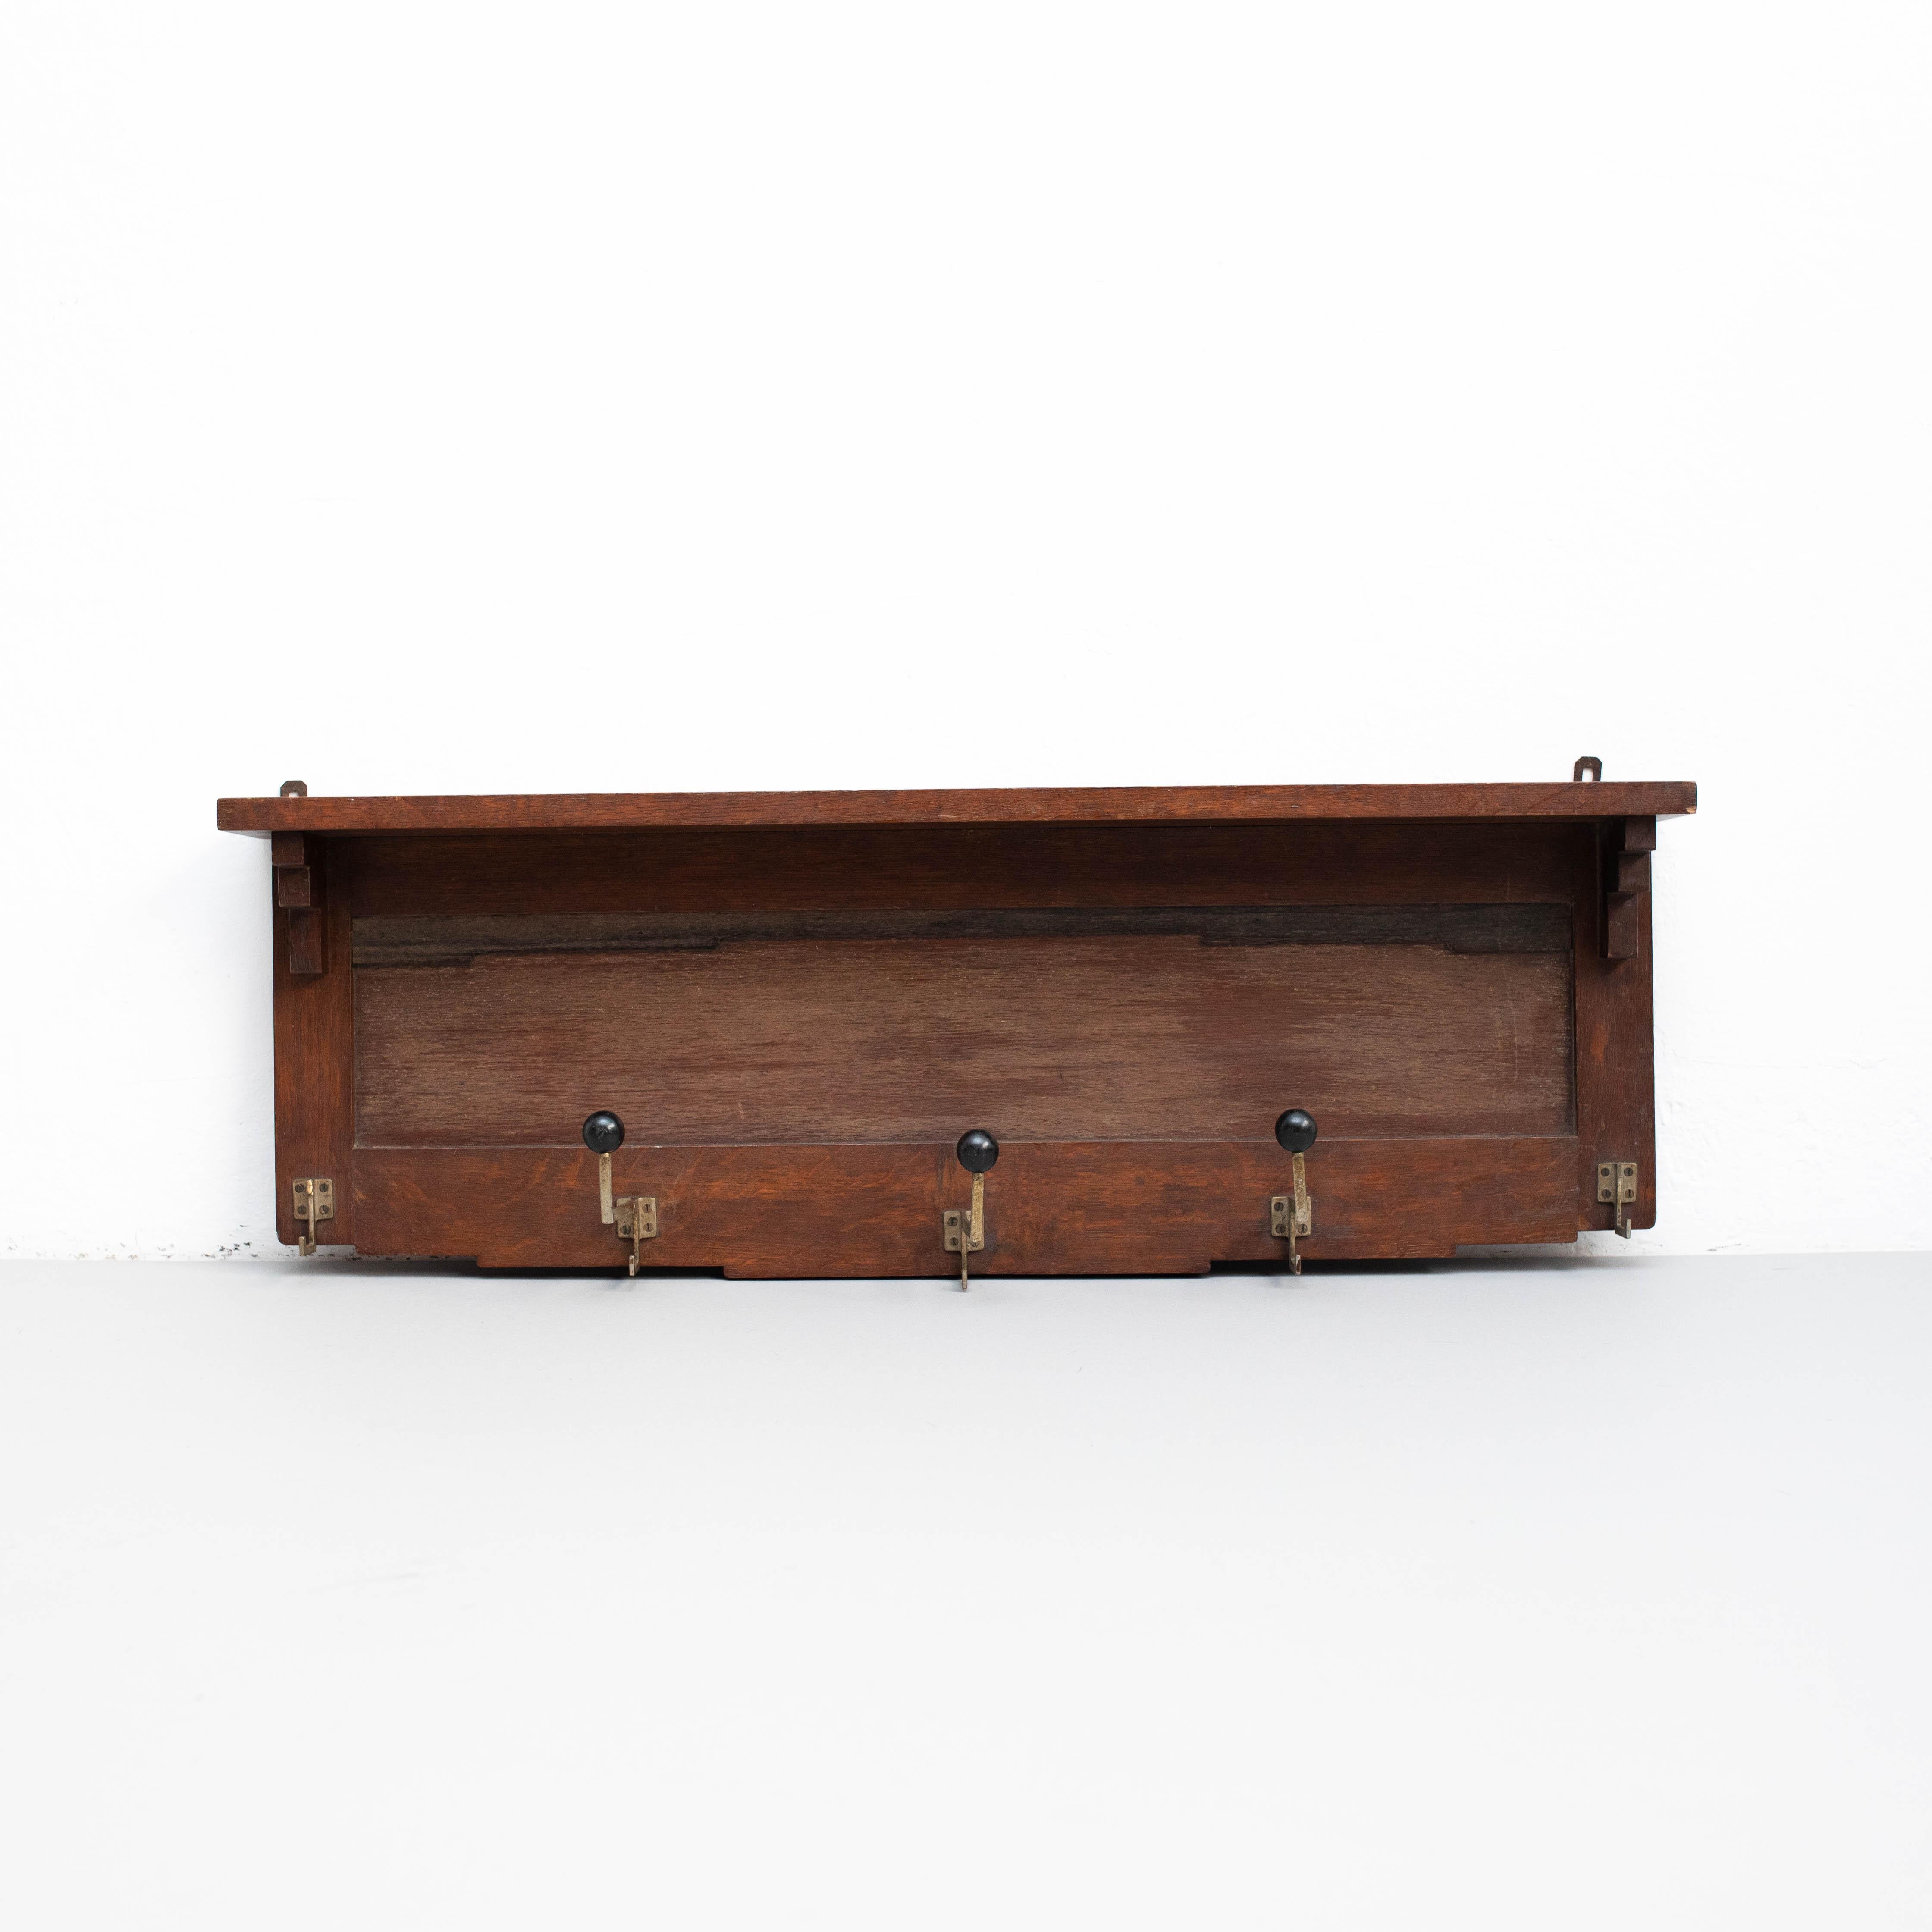 Antique traditional rustic wood hanger.
By unknown artisan from Spain, circa 1960.

In original condition, with minor wear consistent with age and use, preserving a beautiful patina.

Materials:
Wood

Dimensions:
H 14cm 
W 40cm
D 4cm.